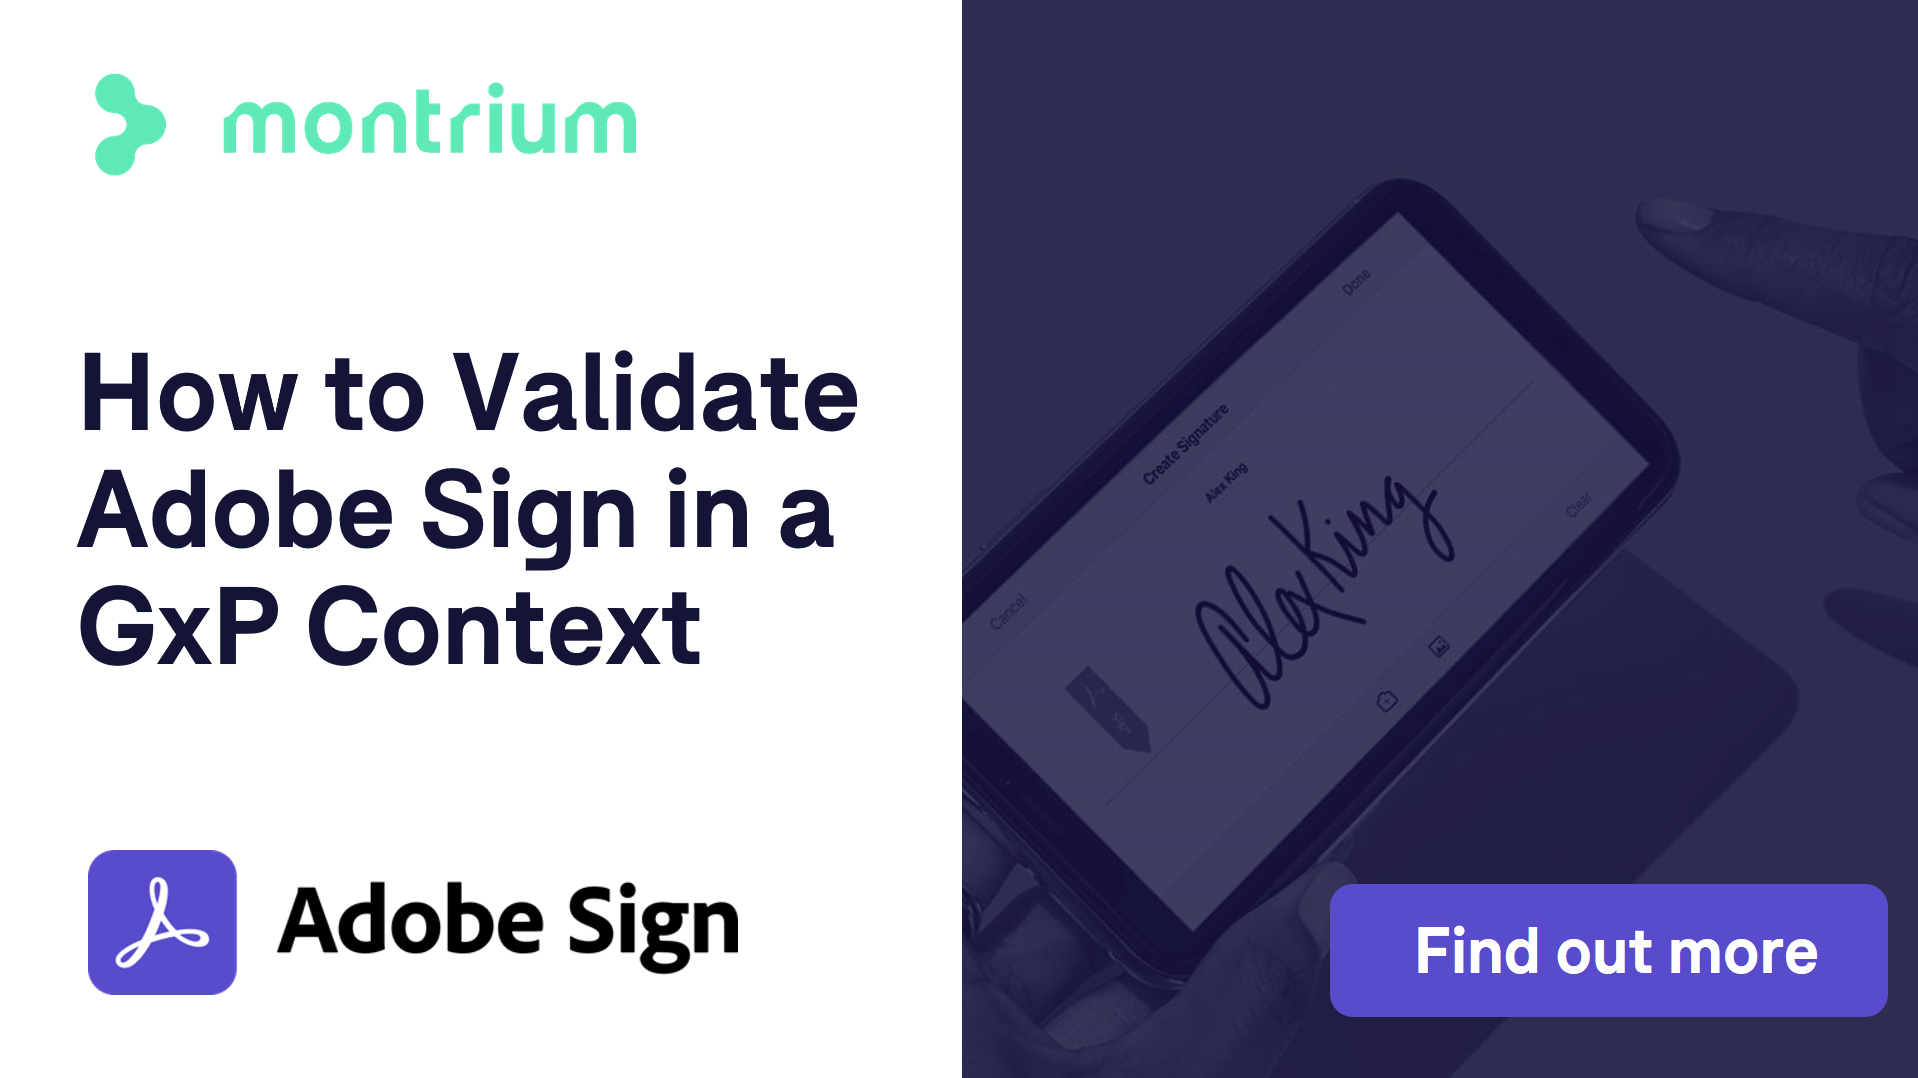 How to Validate Adobe Sign in a GxP Context